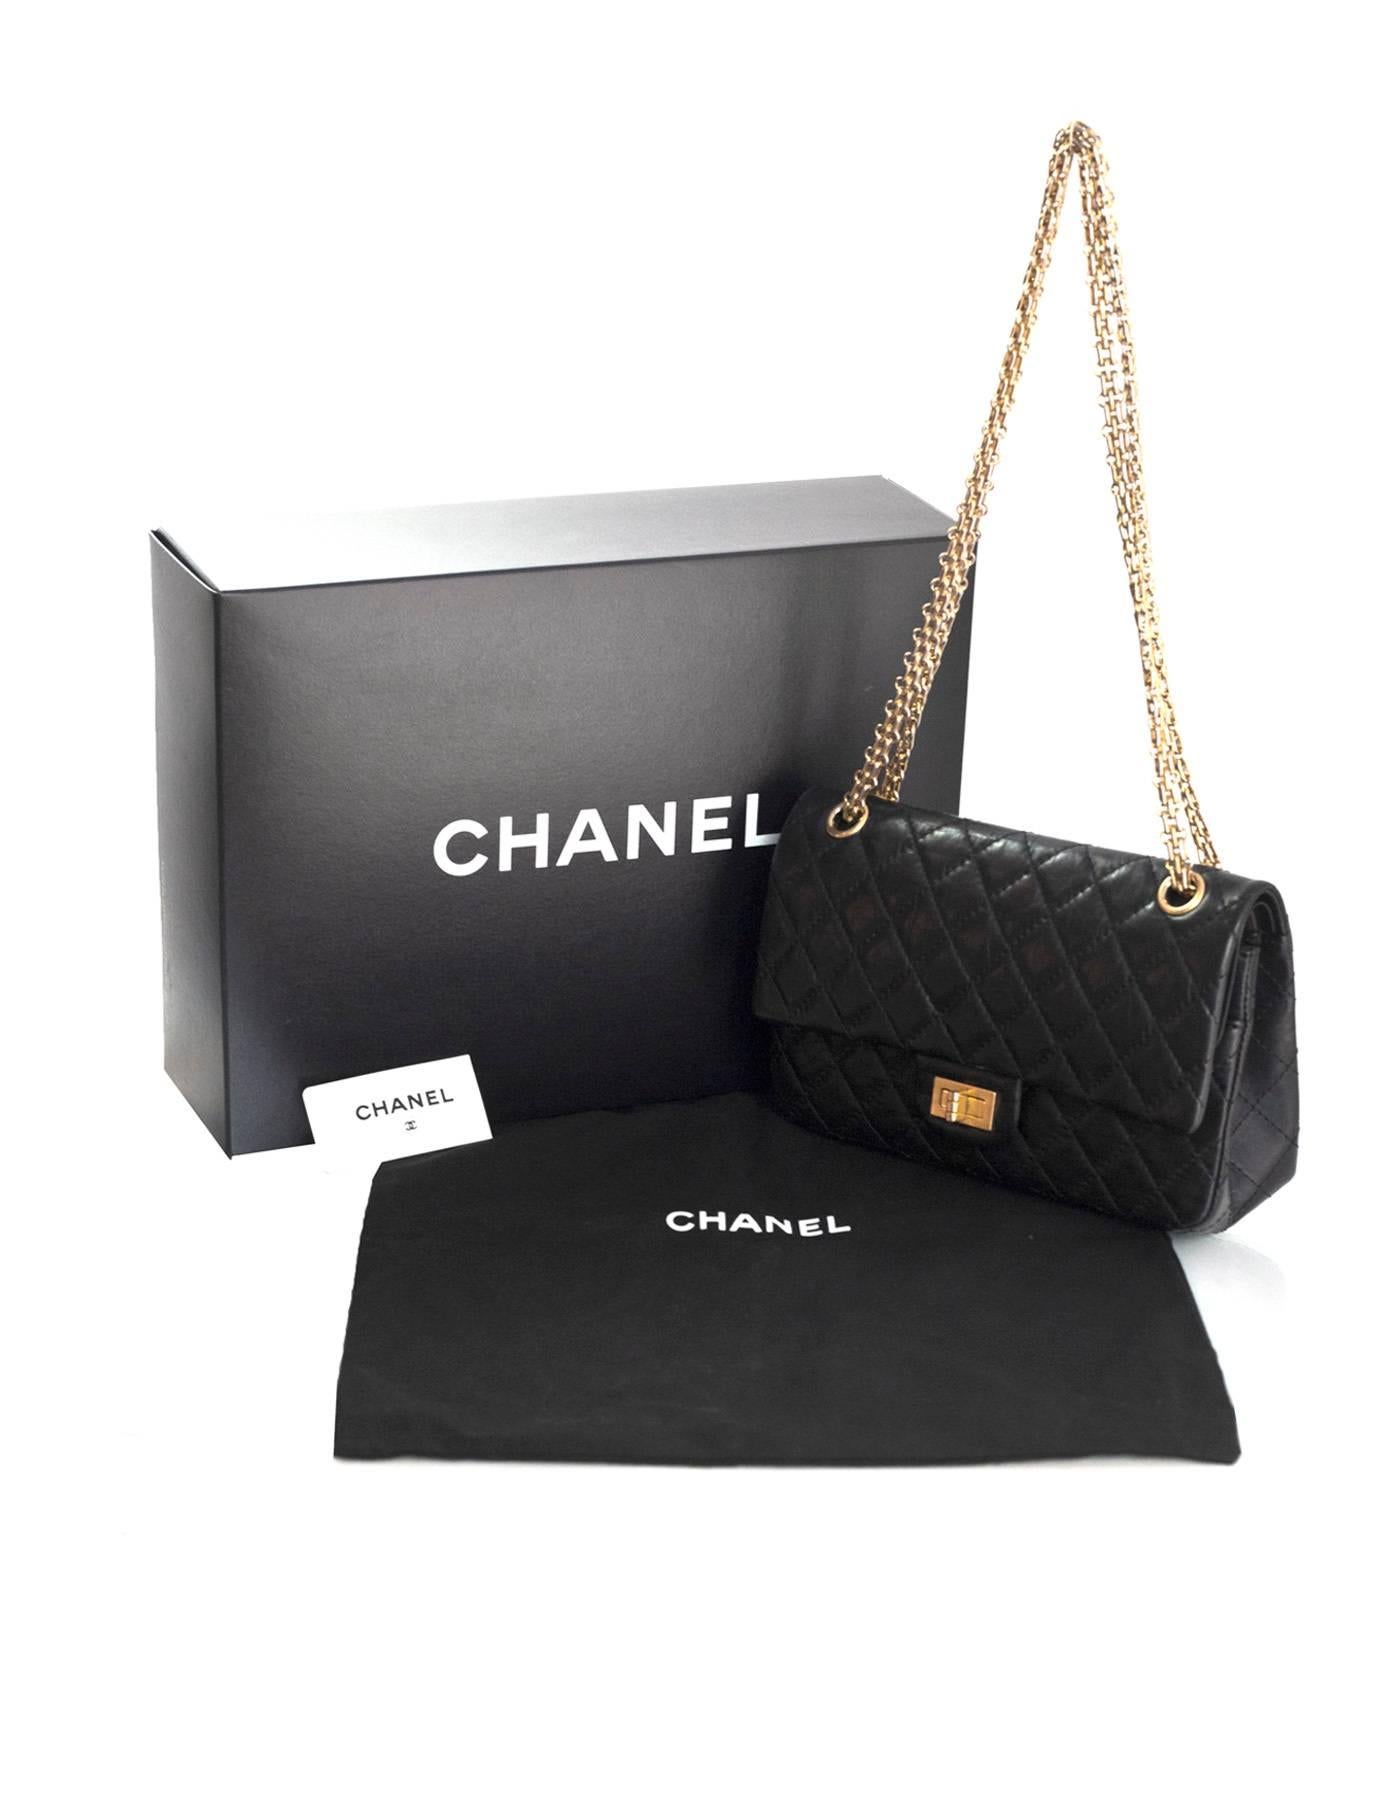 Chanel Black Calfskin Leather 2.55 Reissue 225 Double Flap Classic Bag 3